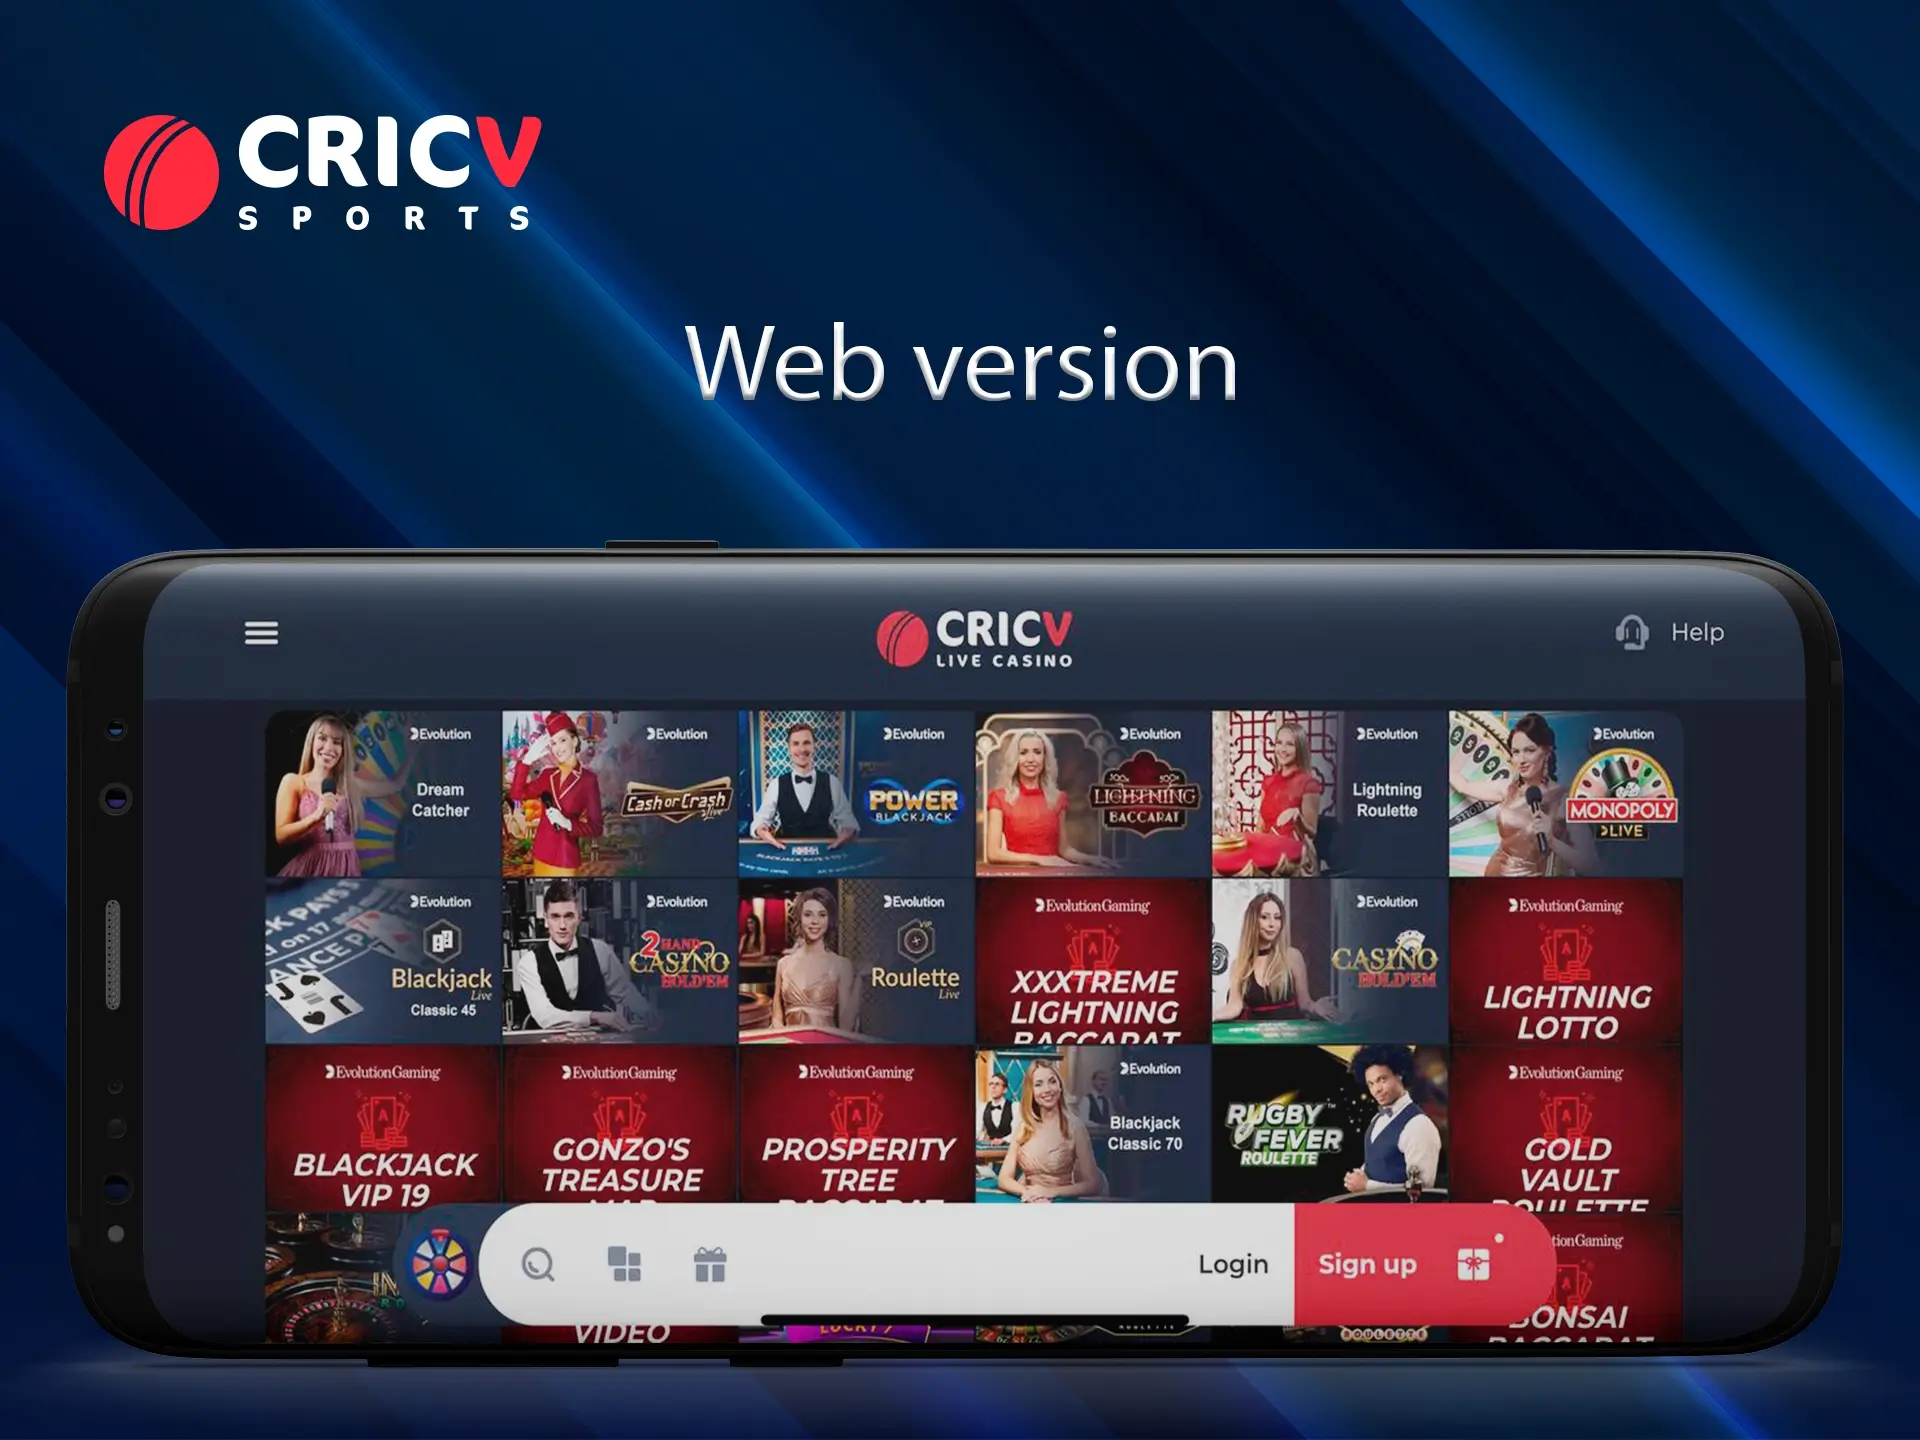 The Cricv mobile site is optimised for any device so all you need is a good quality internet connection.